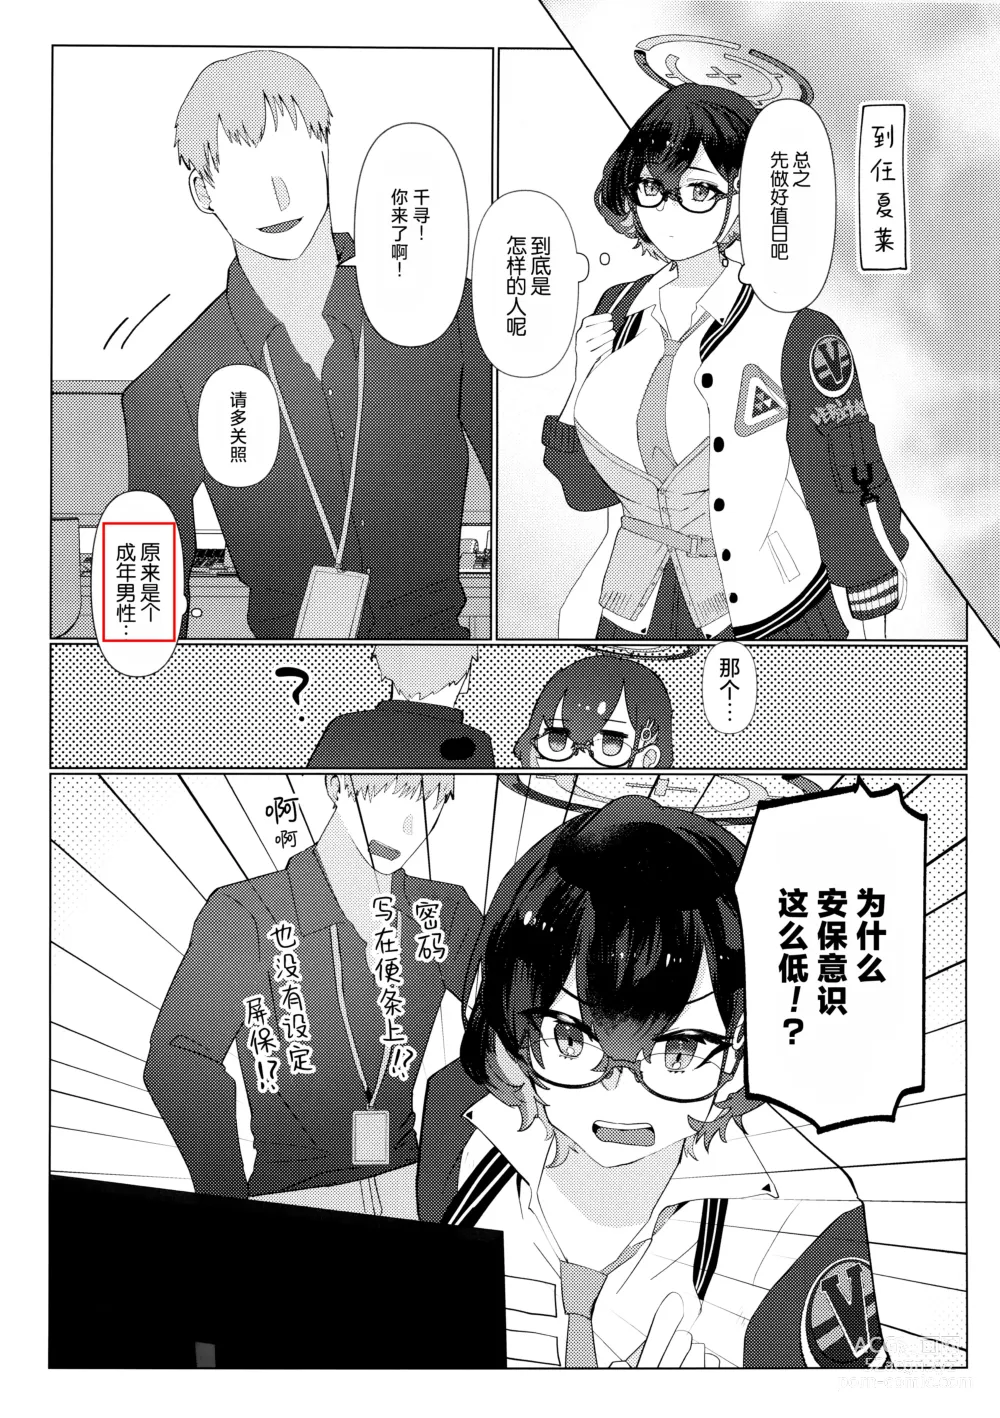 Page 4 of doujinshi 第一次的教学